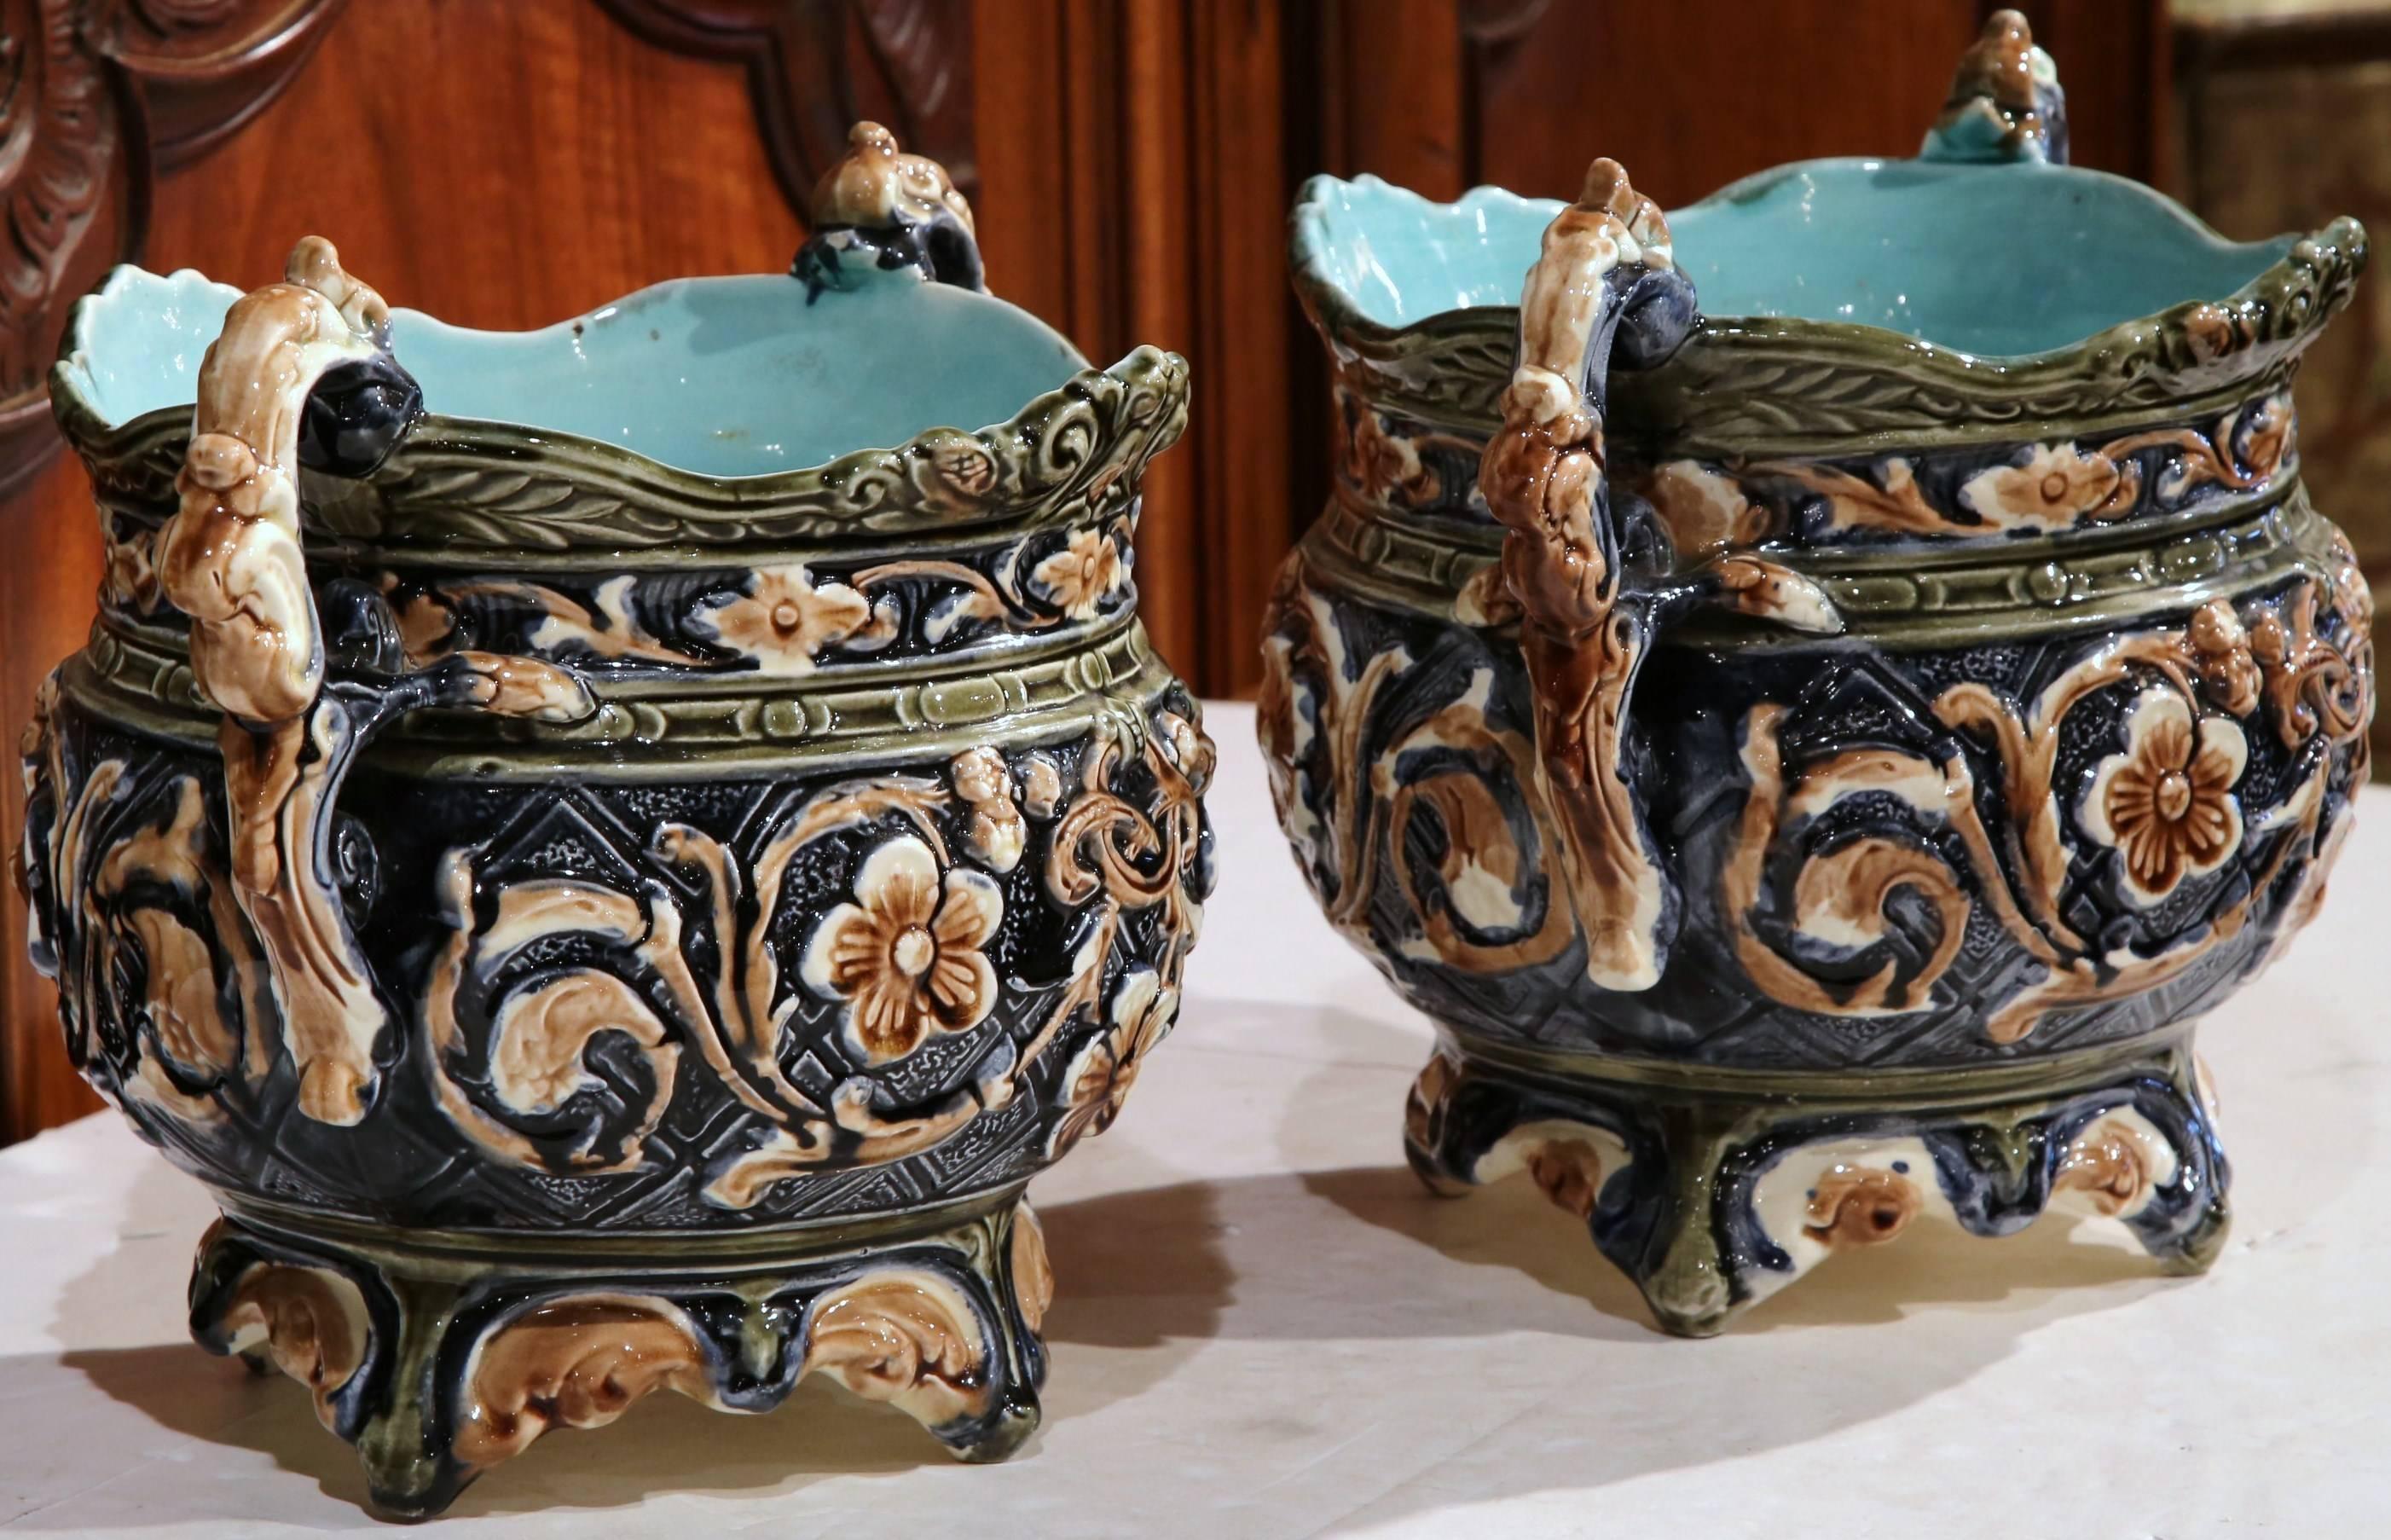 Decorate a mantel (fireplace) or buffet with this colorful pair of antique Majolica vases. The two, ornate, sculptural pots sit on small feet and feature decorative handles on either side; sculpted in France, circa 1890, the ceramic vases have a